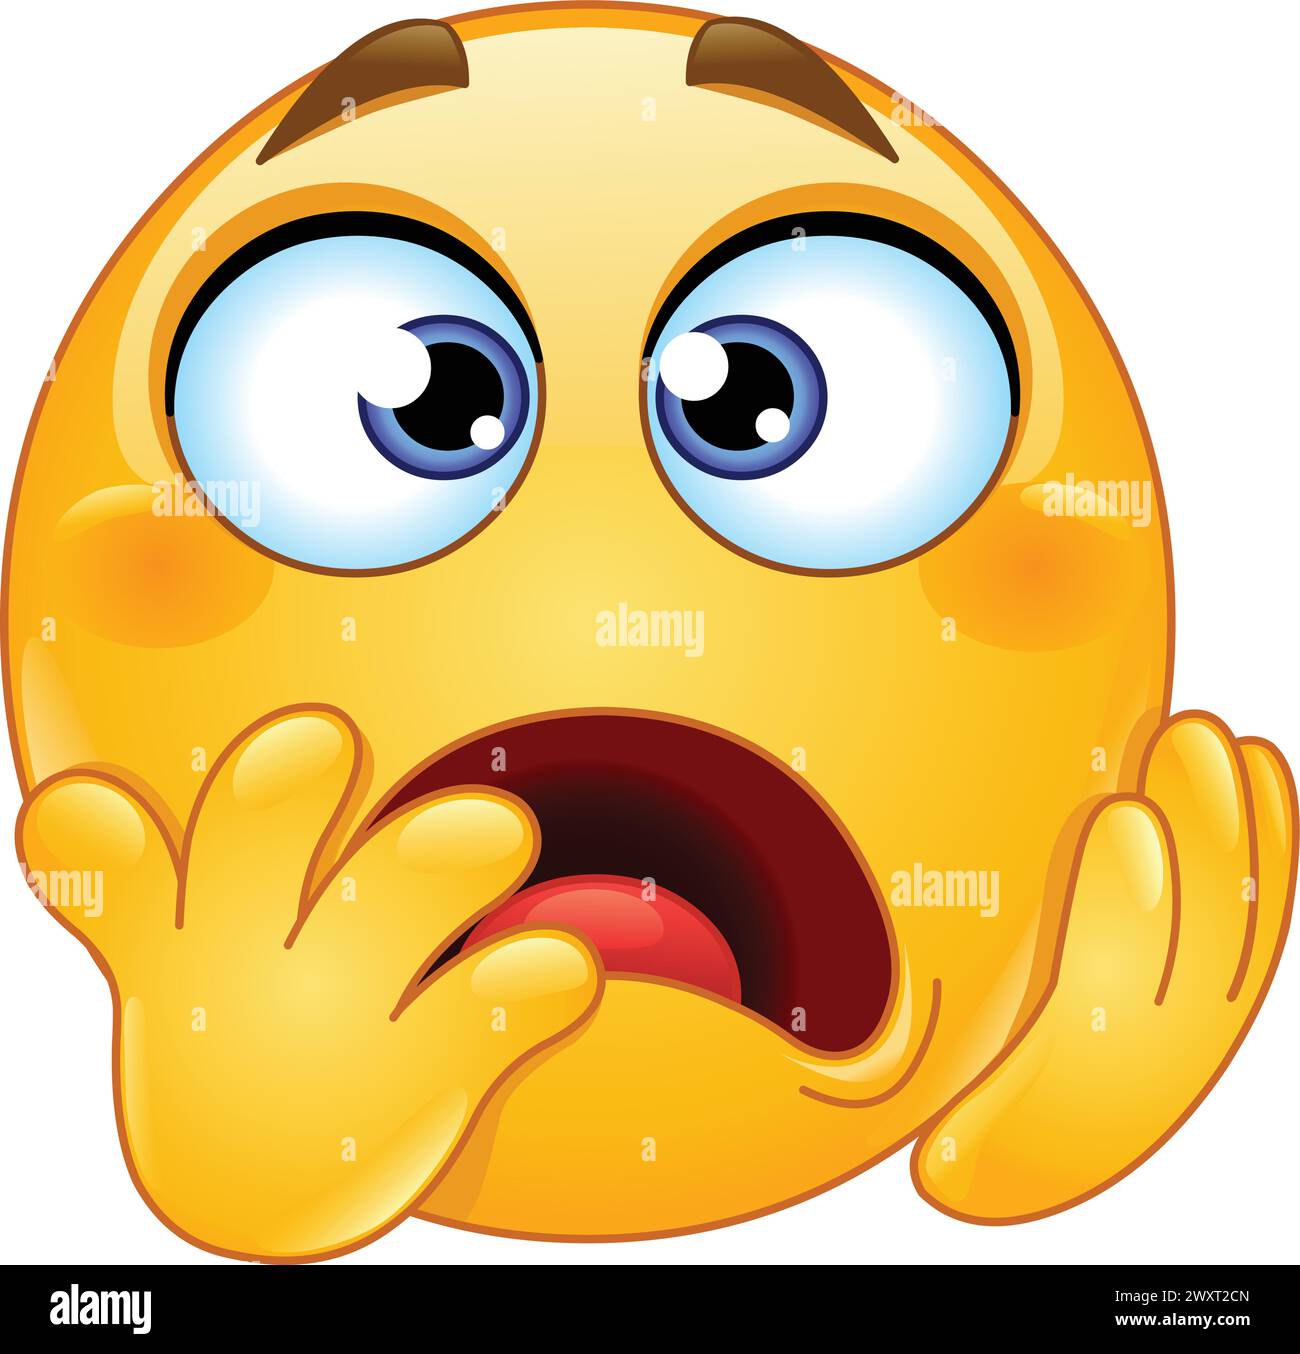 Shocked and worried emoji emoticon covers part of its face with hands Stock Vector